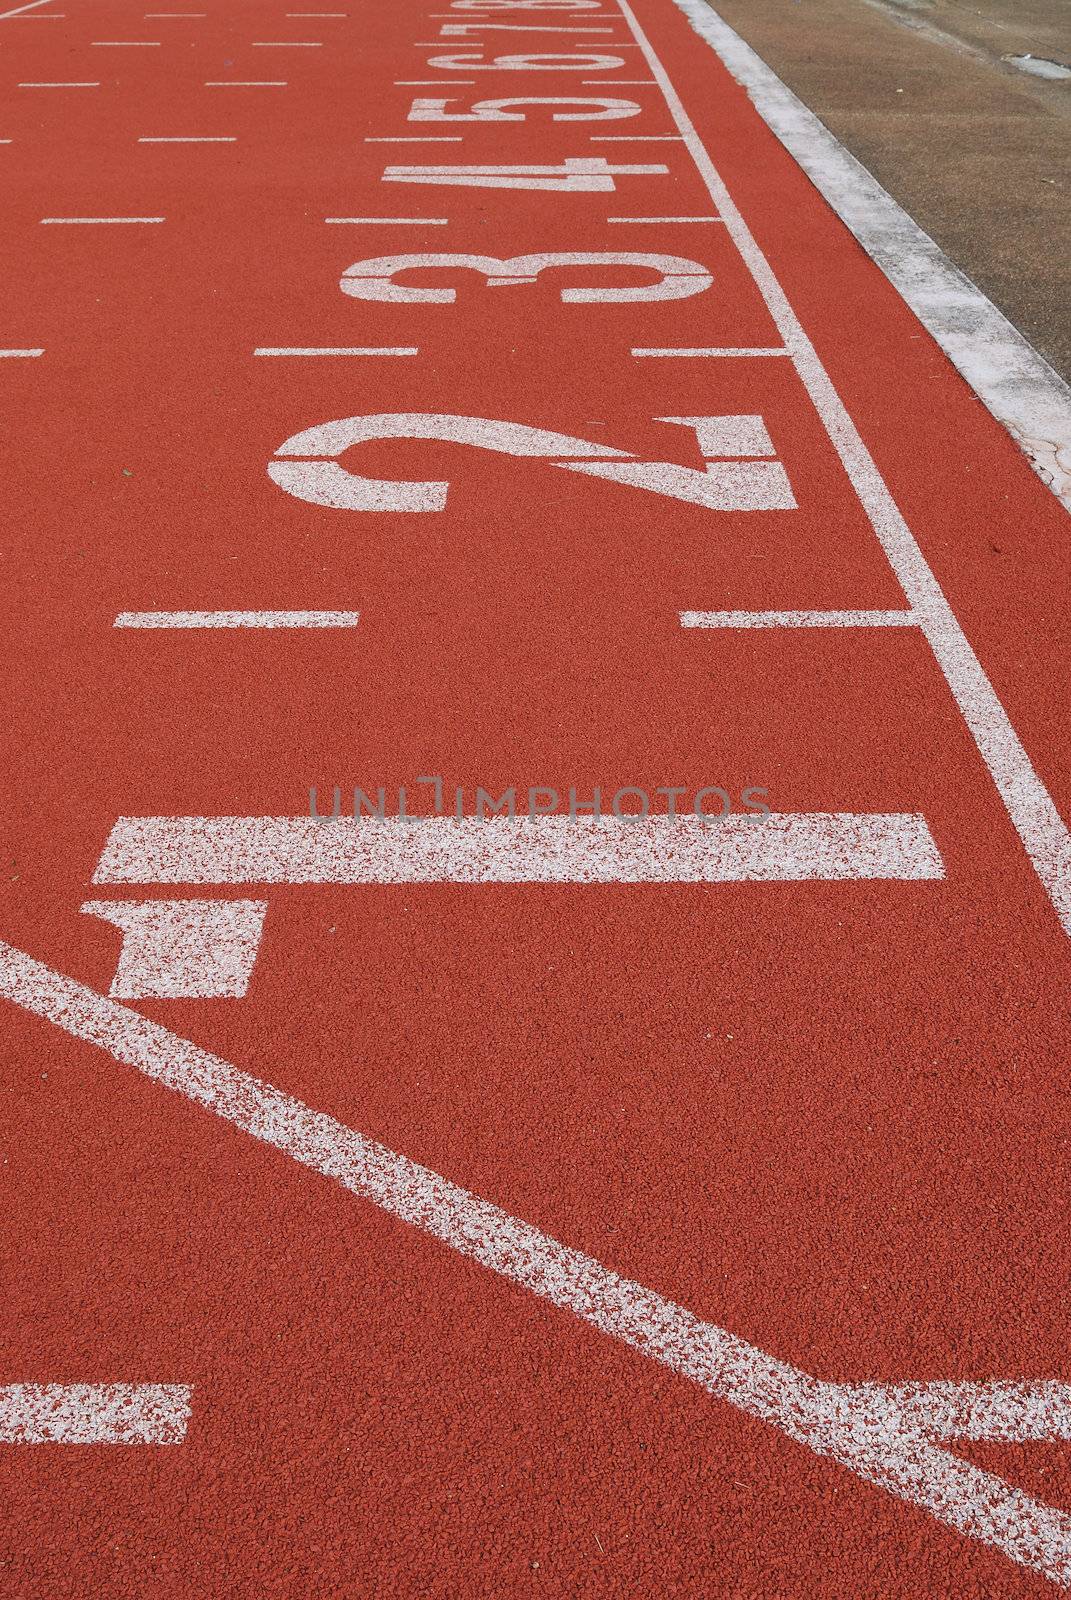 Athletic running track in stadium  by teen00000